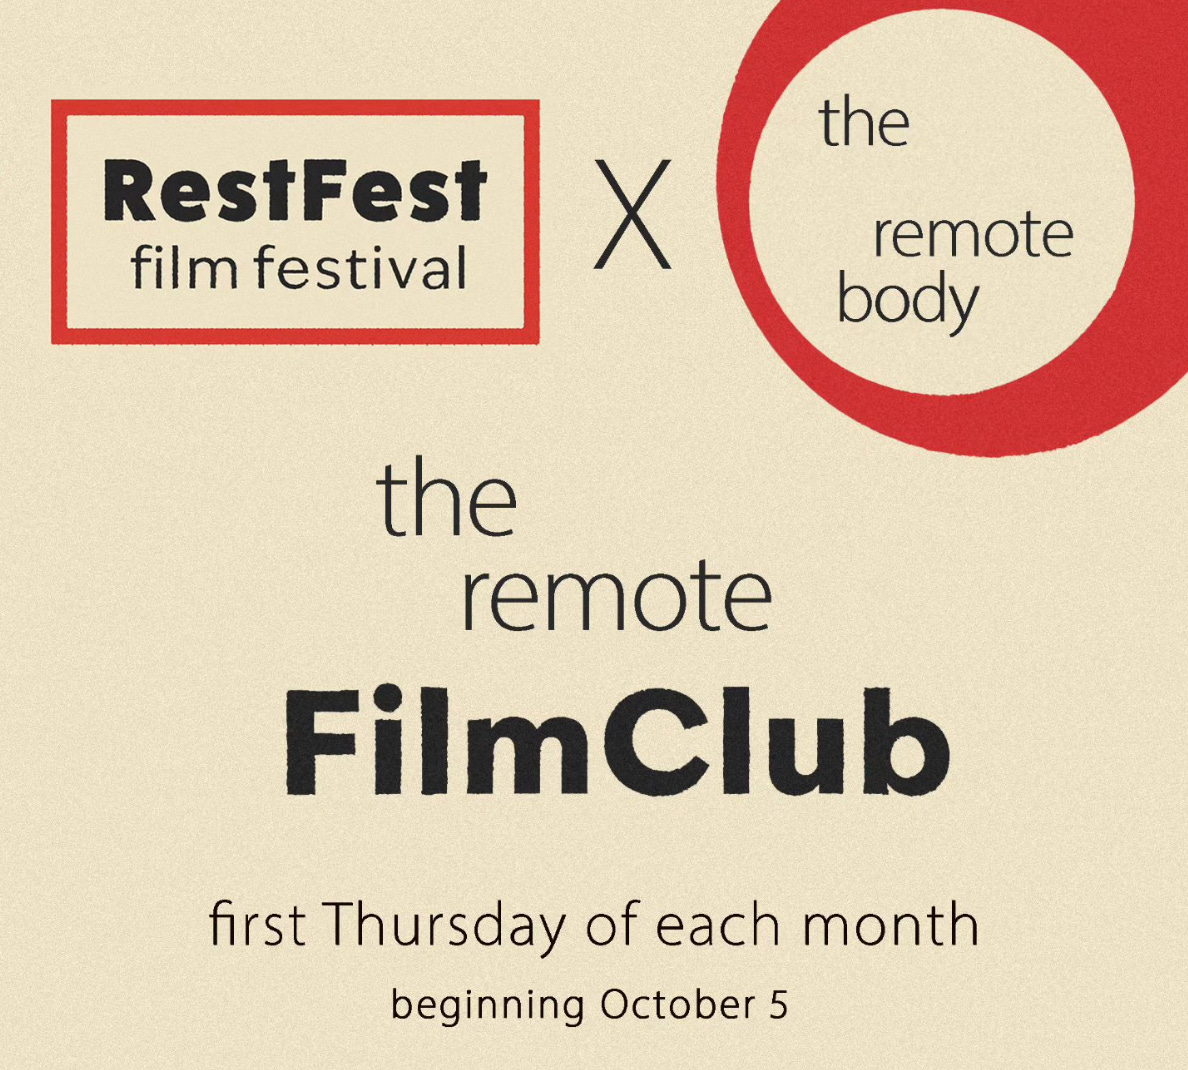 black text on a light background reads 'the remote Film club  First Thursday of each month 6pm GMT beginning October 5  @restfestfilmfestival @theremotebody  At the top left of the image there is the FestFest logo, a thick red box which black text that reads RestFest film festival  At the top right of the image black text reads 'the remote body' inside a red circle